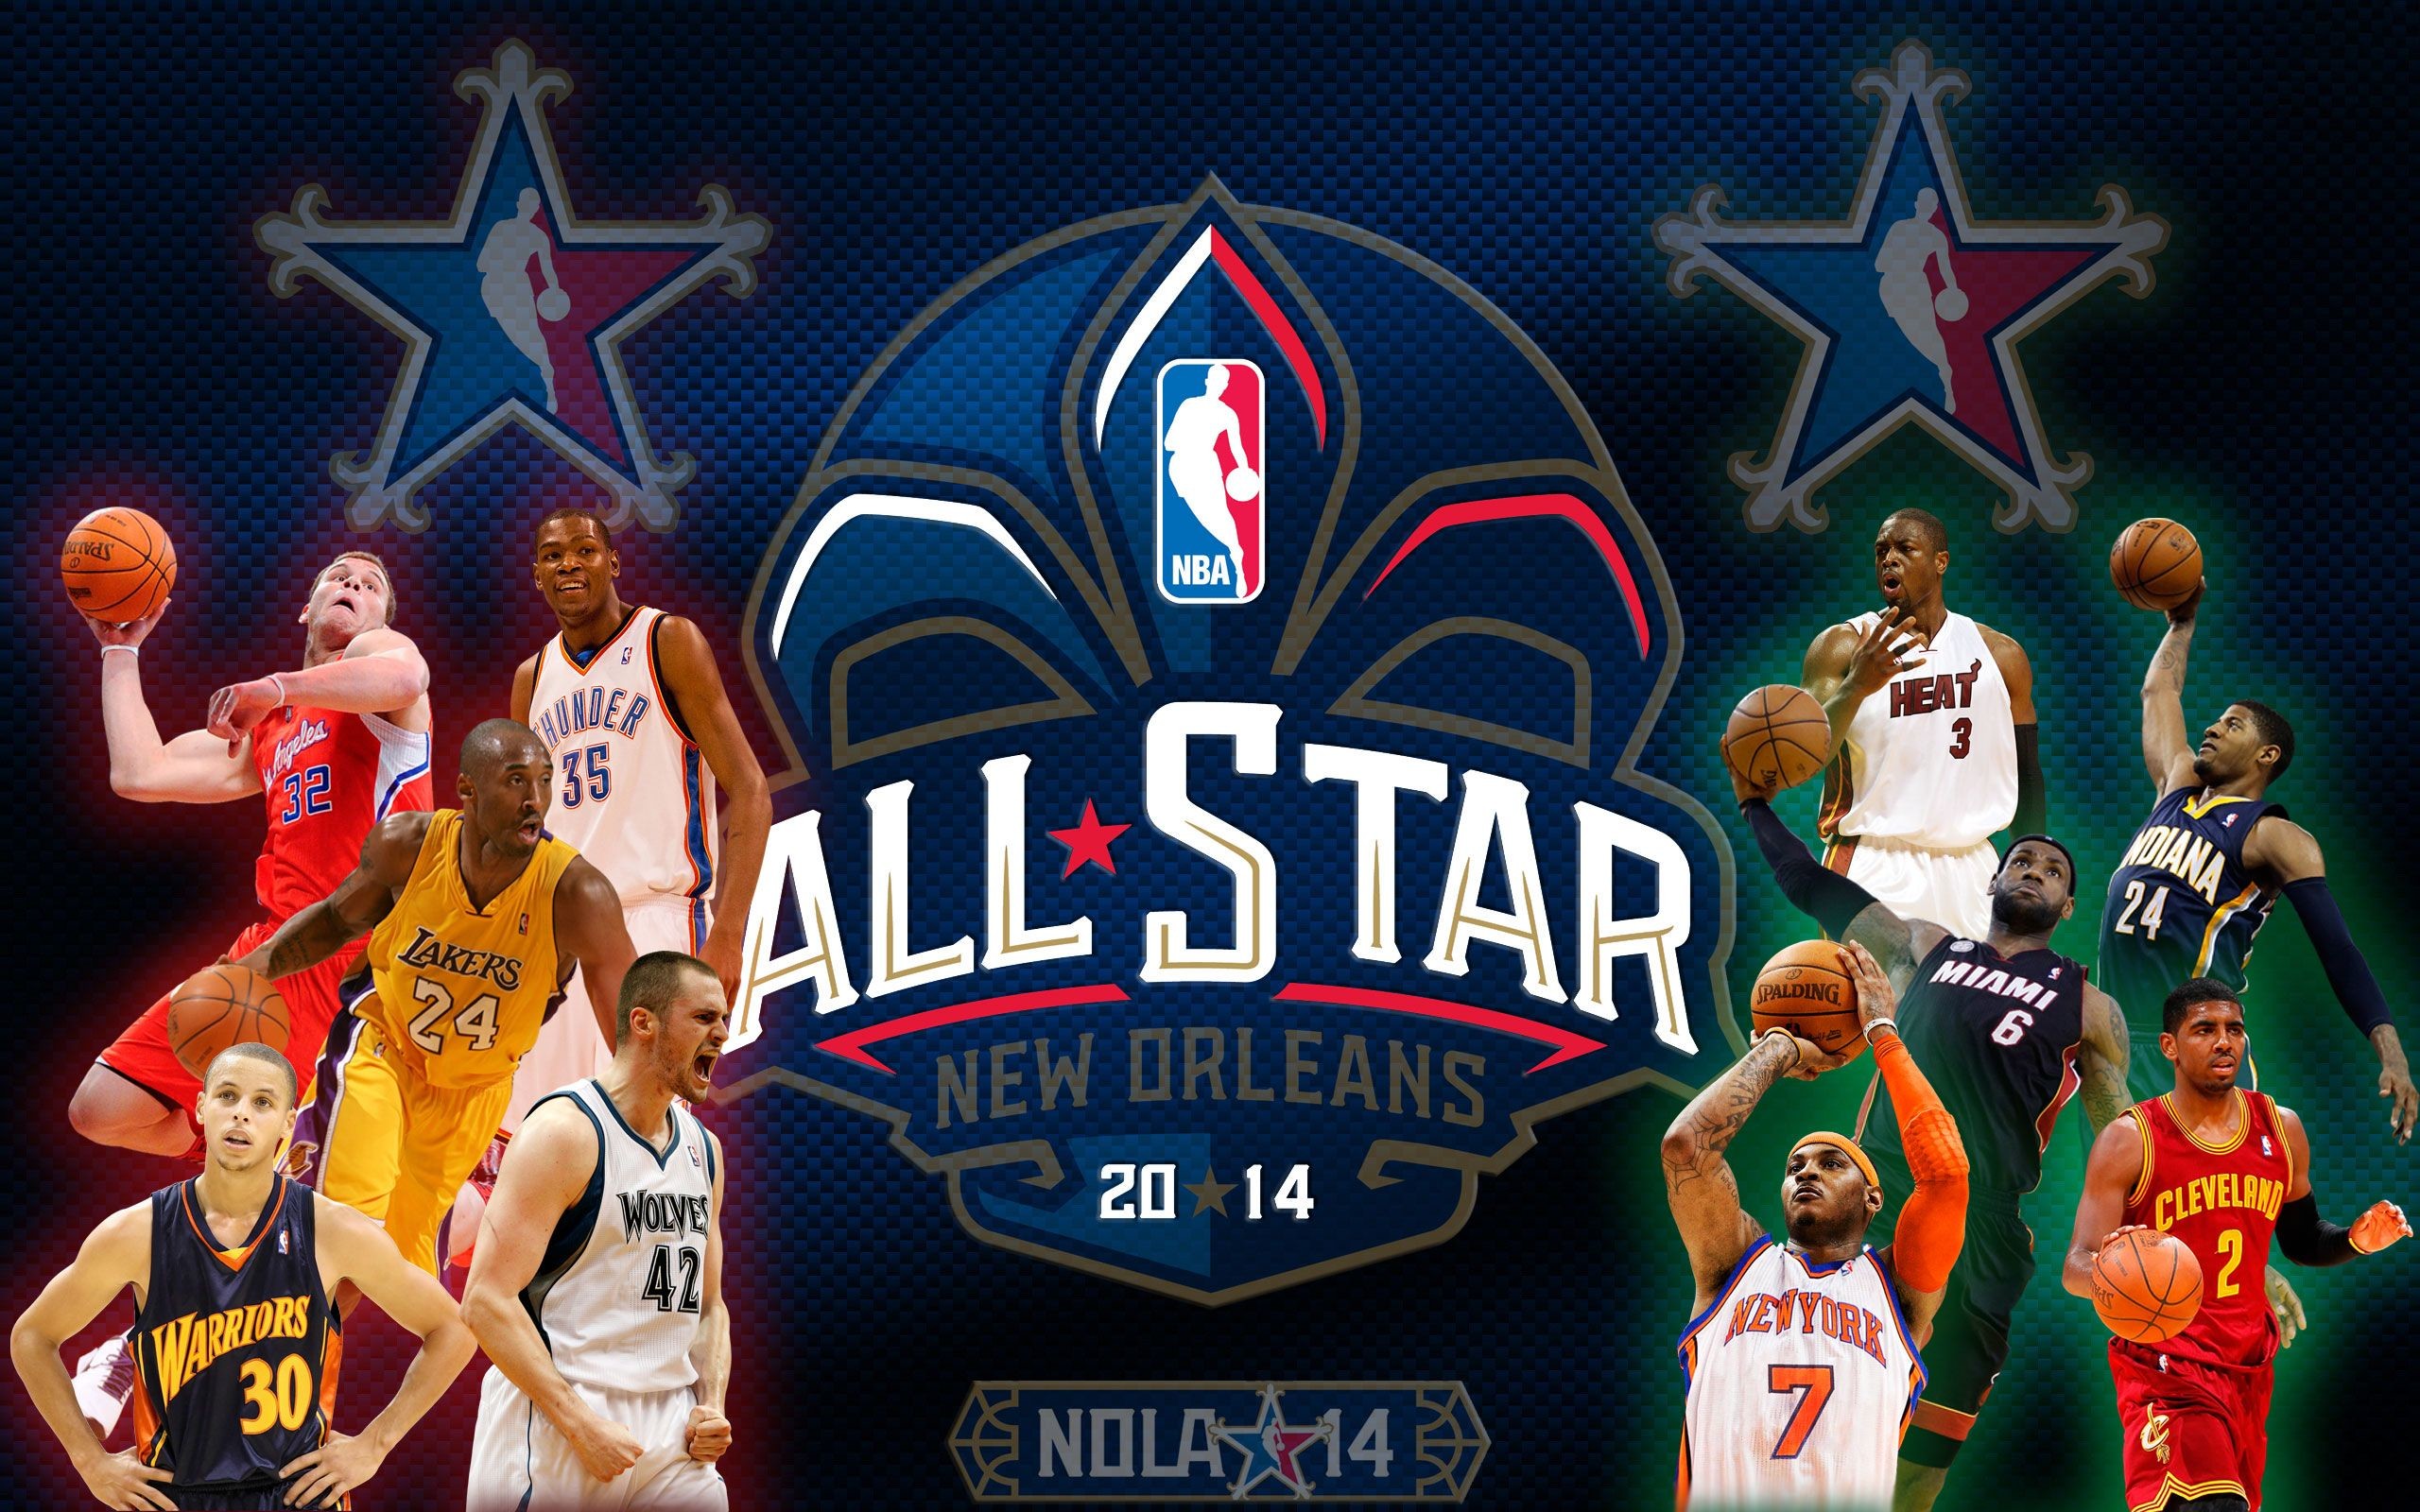 2560x1600 New Orleans selected to host NBA All-Star 2017 | NBA | Pinterest | New  orleans, NBA and All star